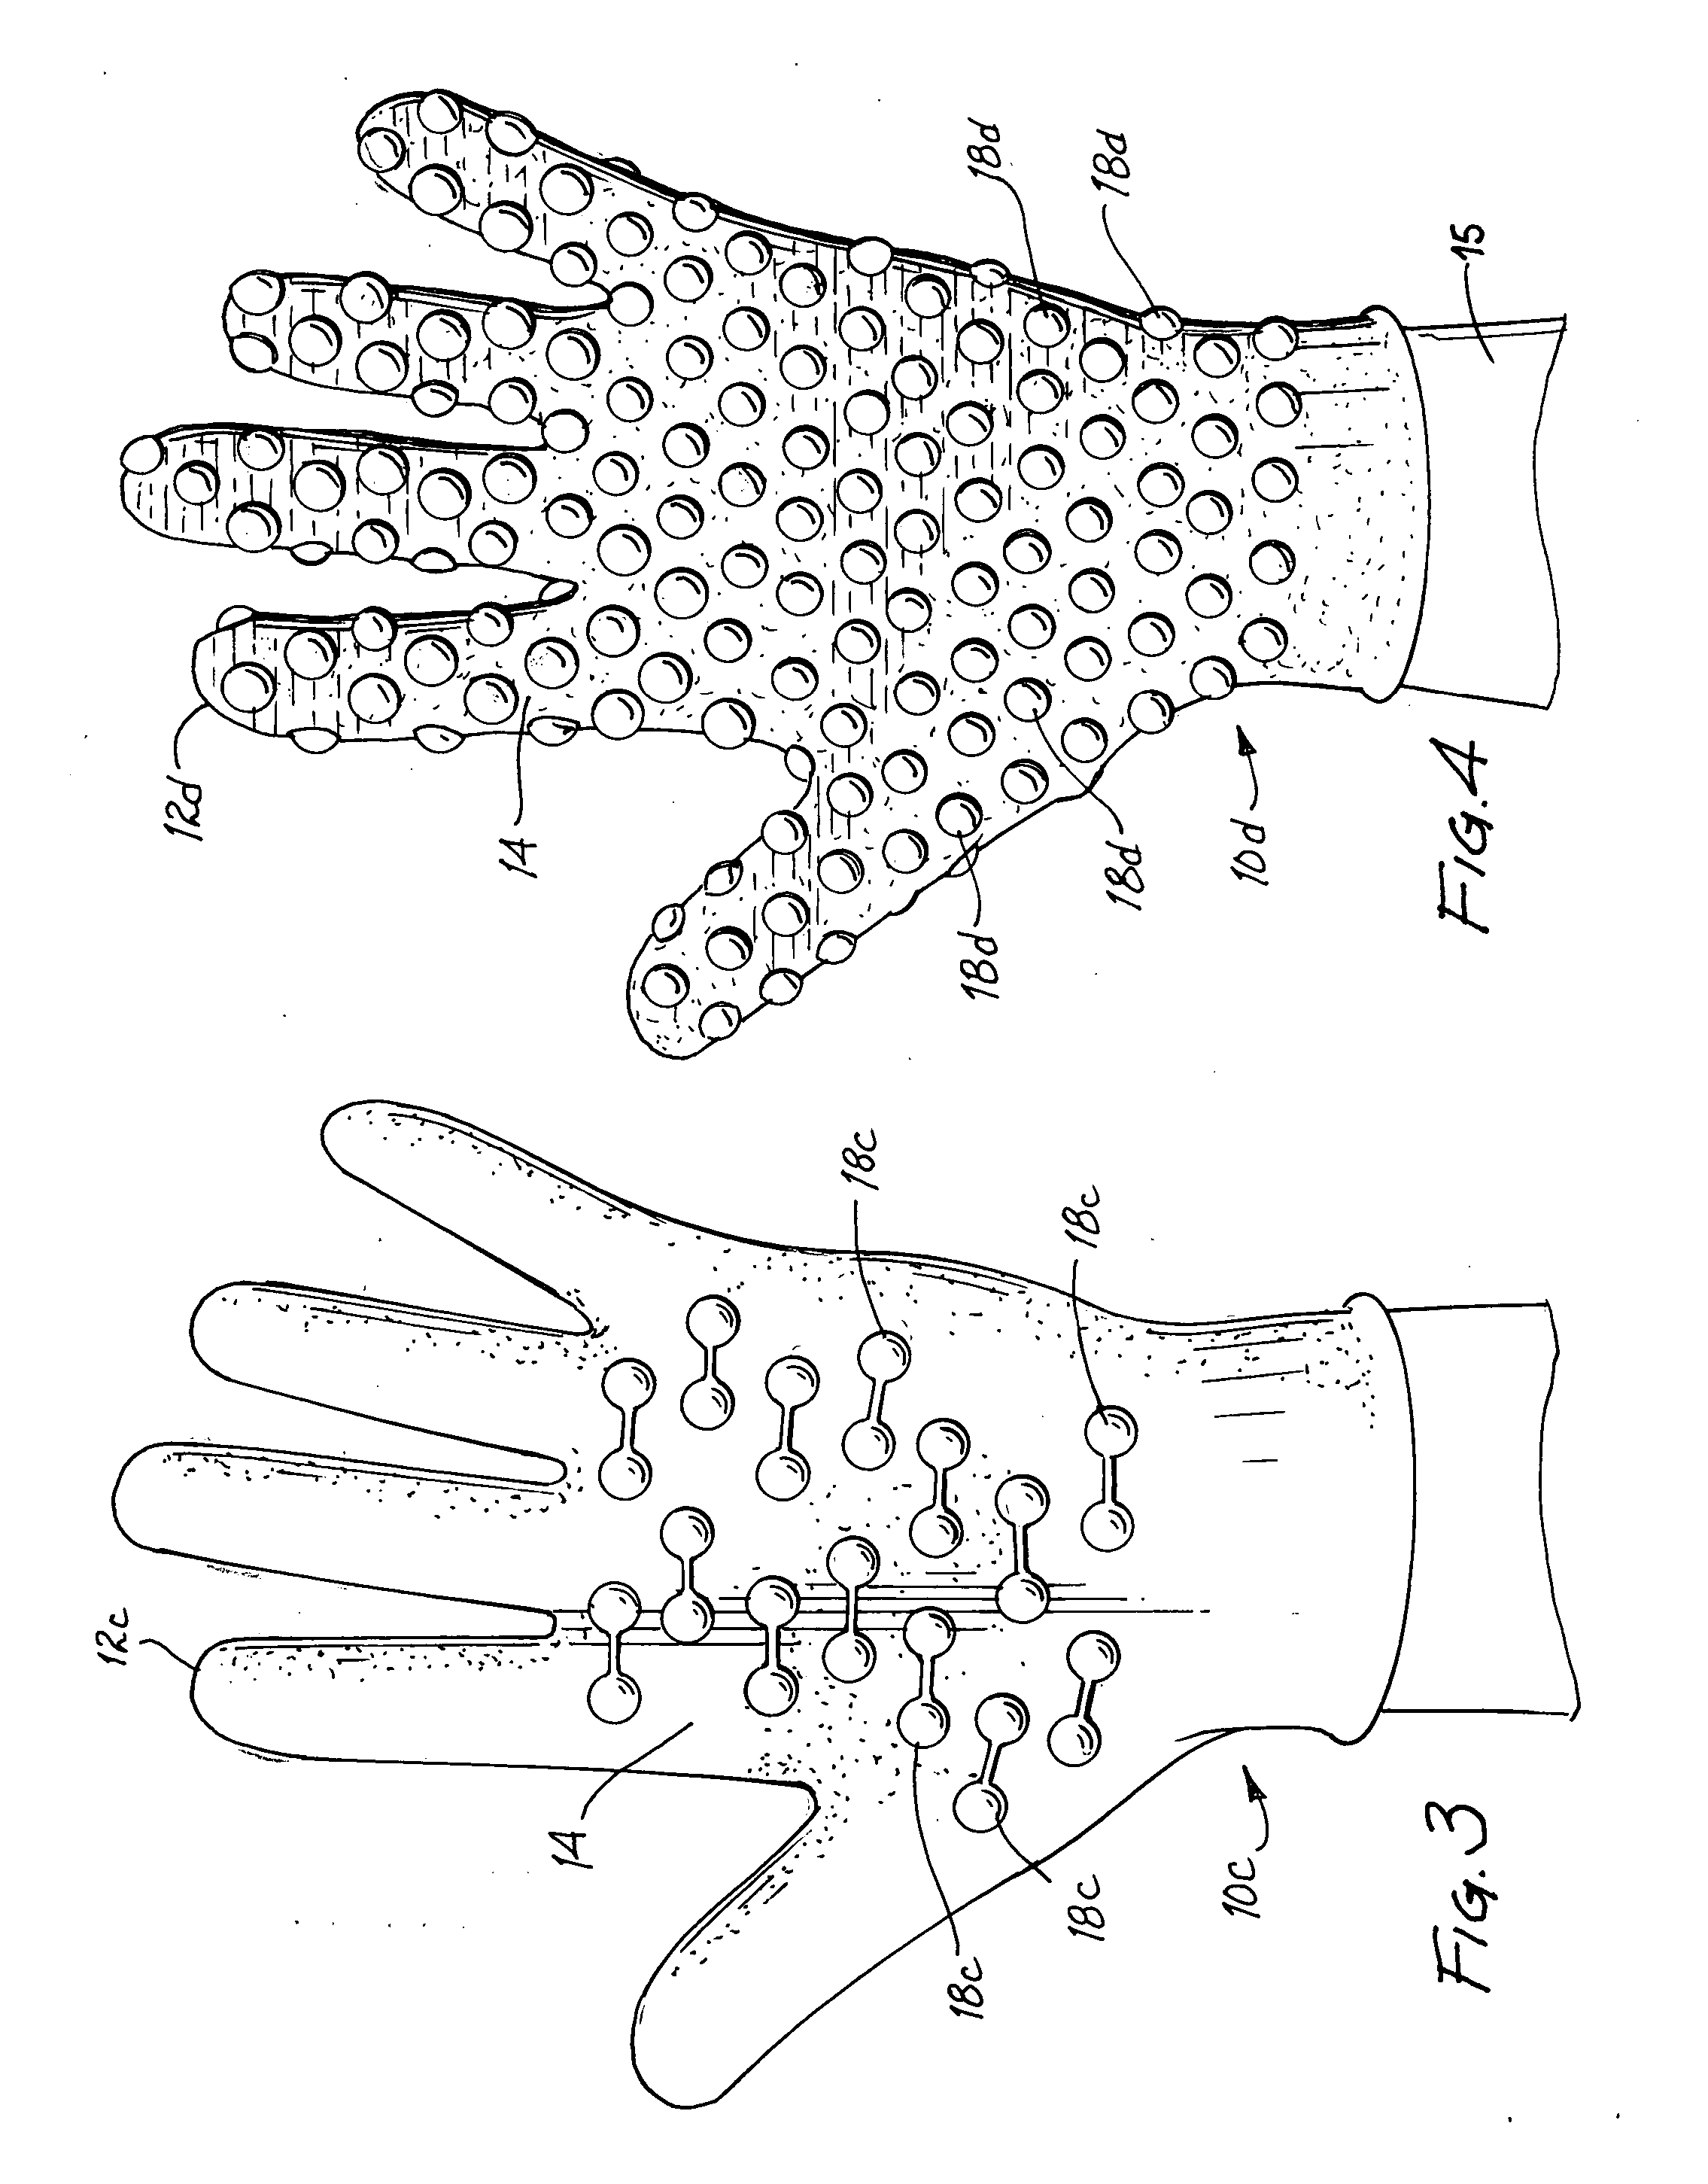 Slip-resistant extremity covering and method therefor